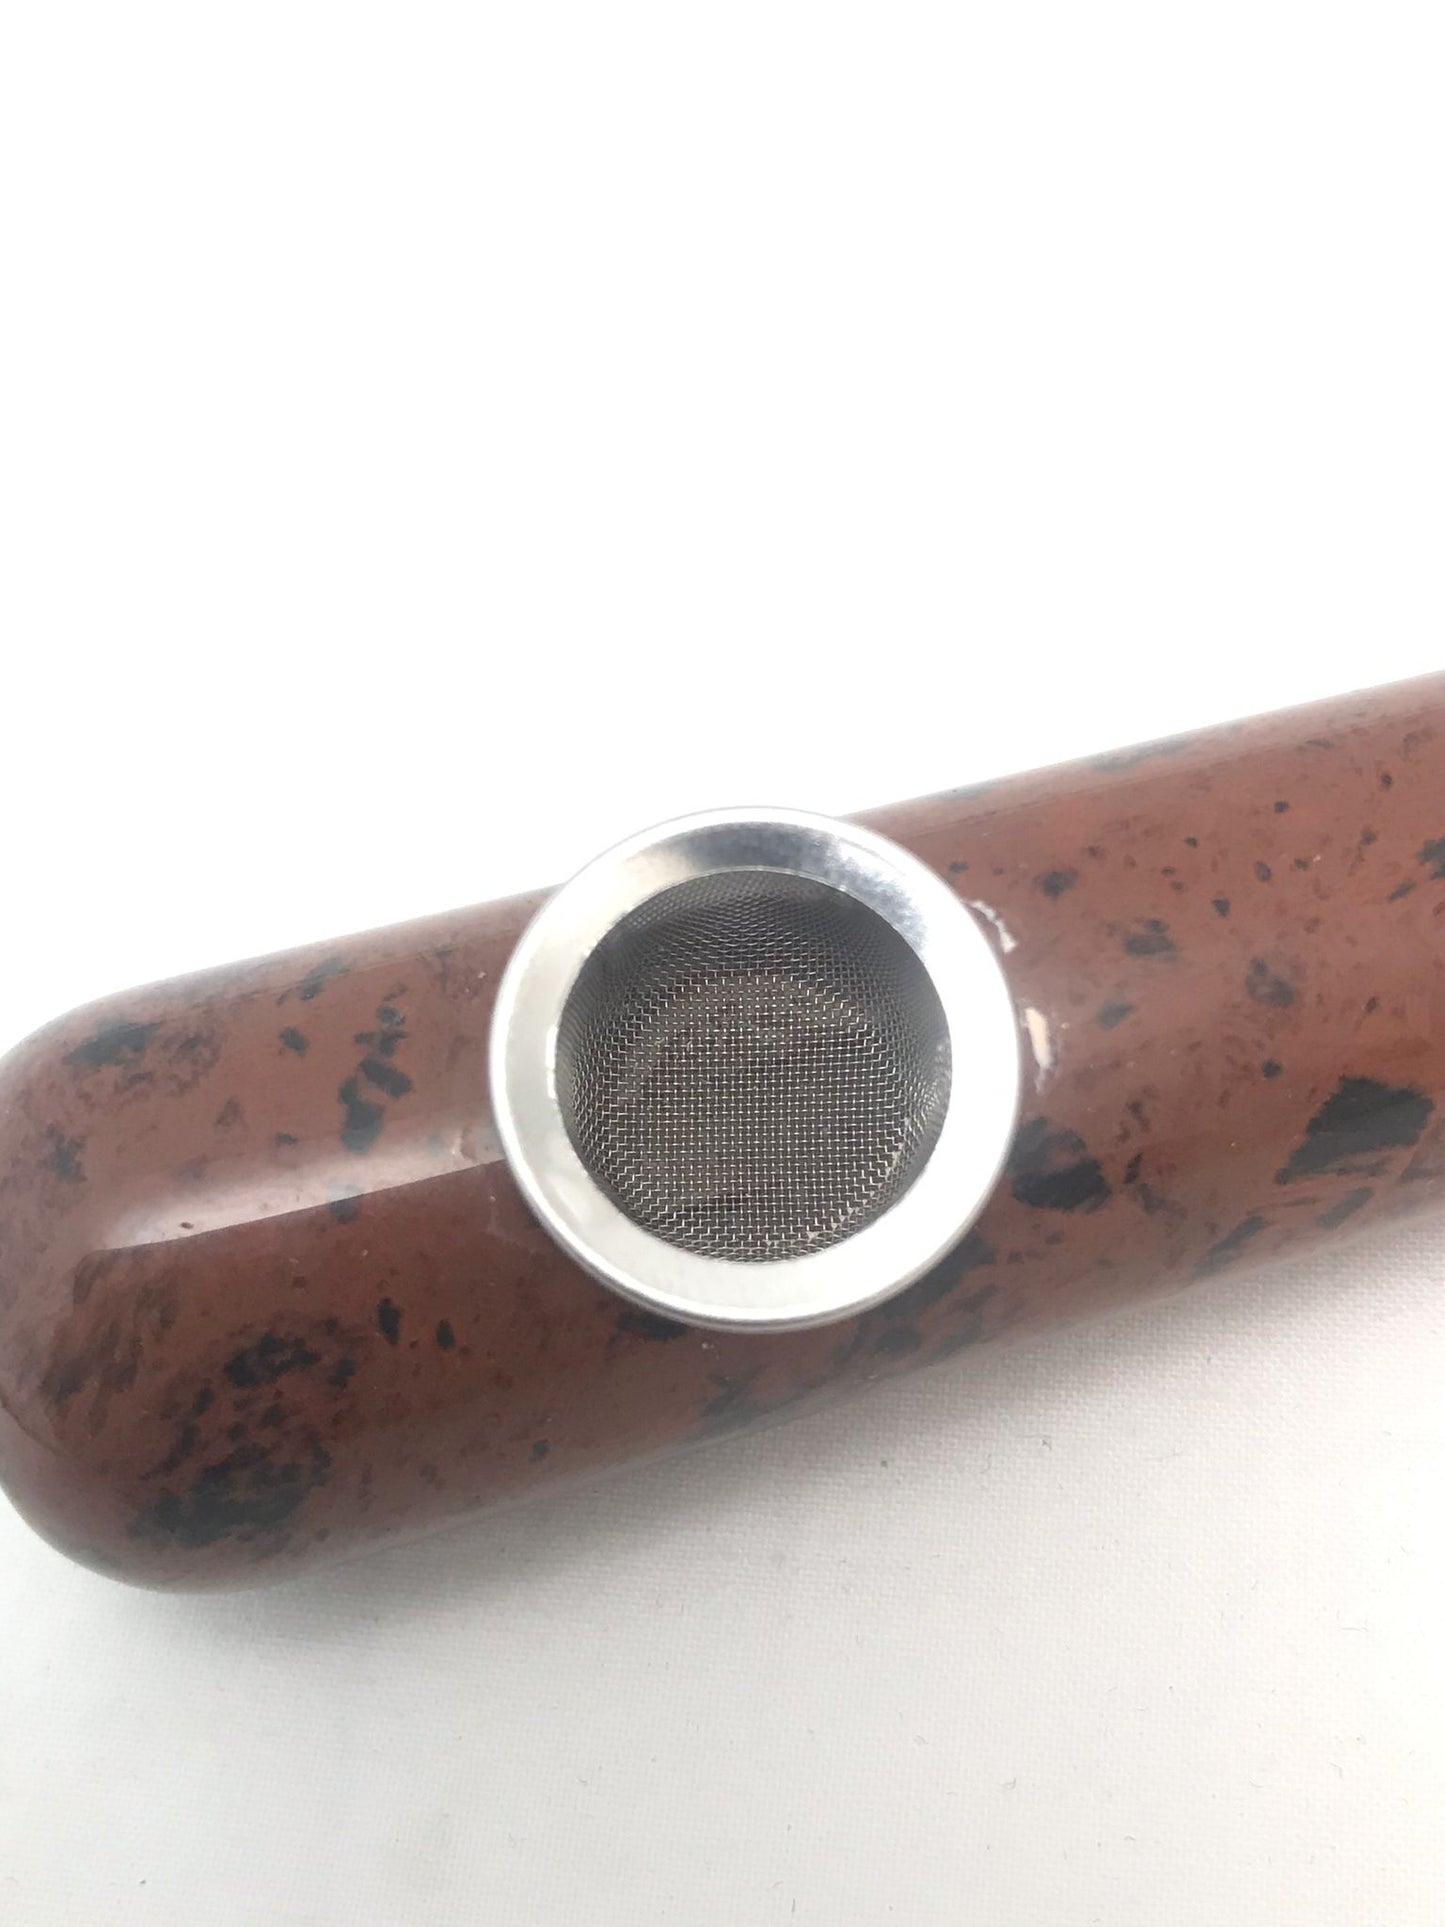 Real Natural healing stone pipe RED OBSIDIAN